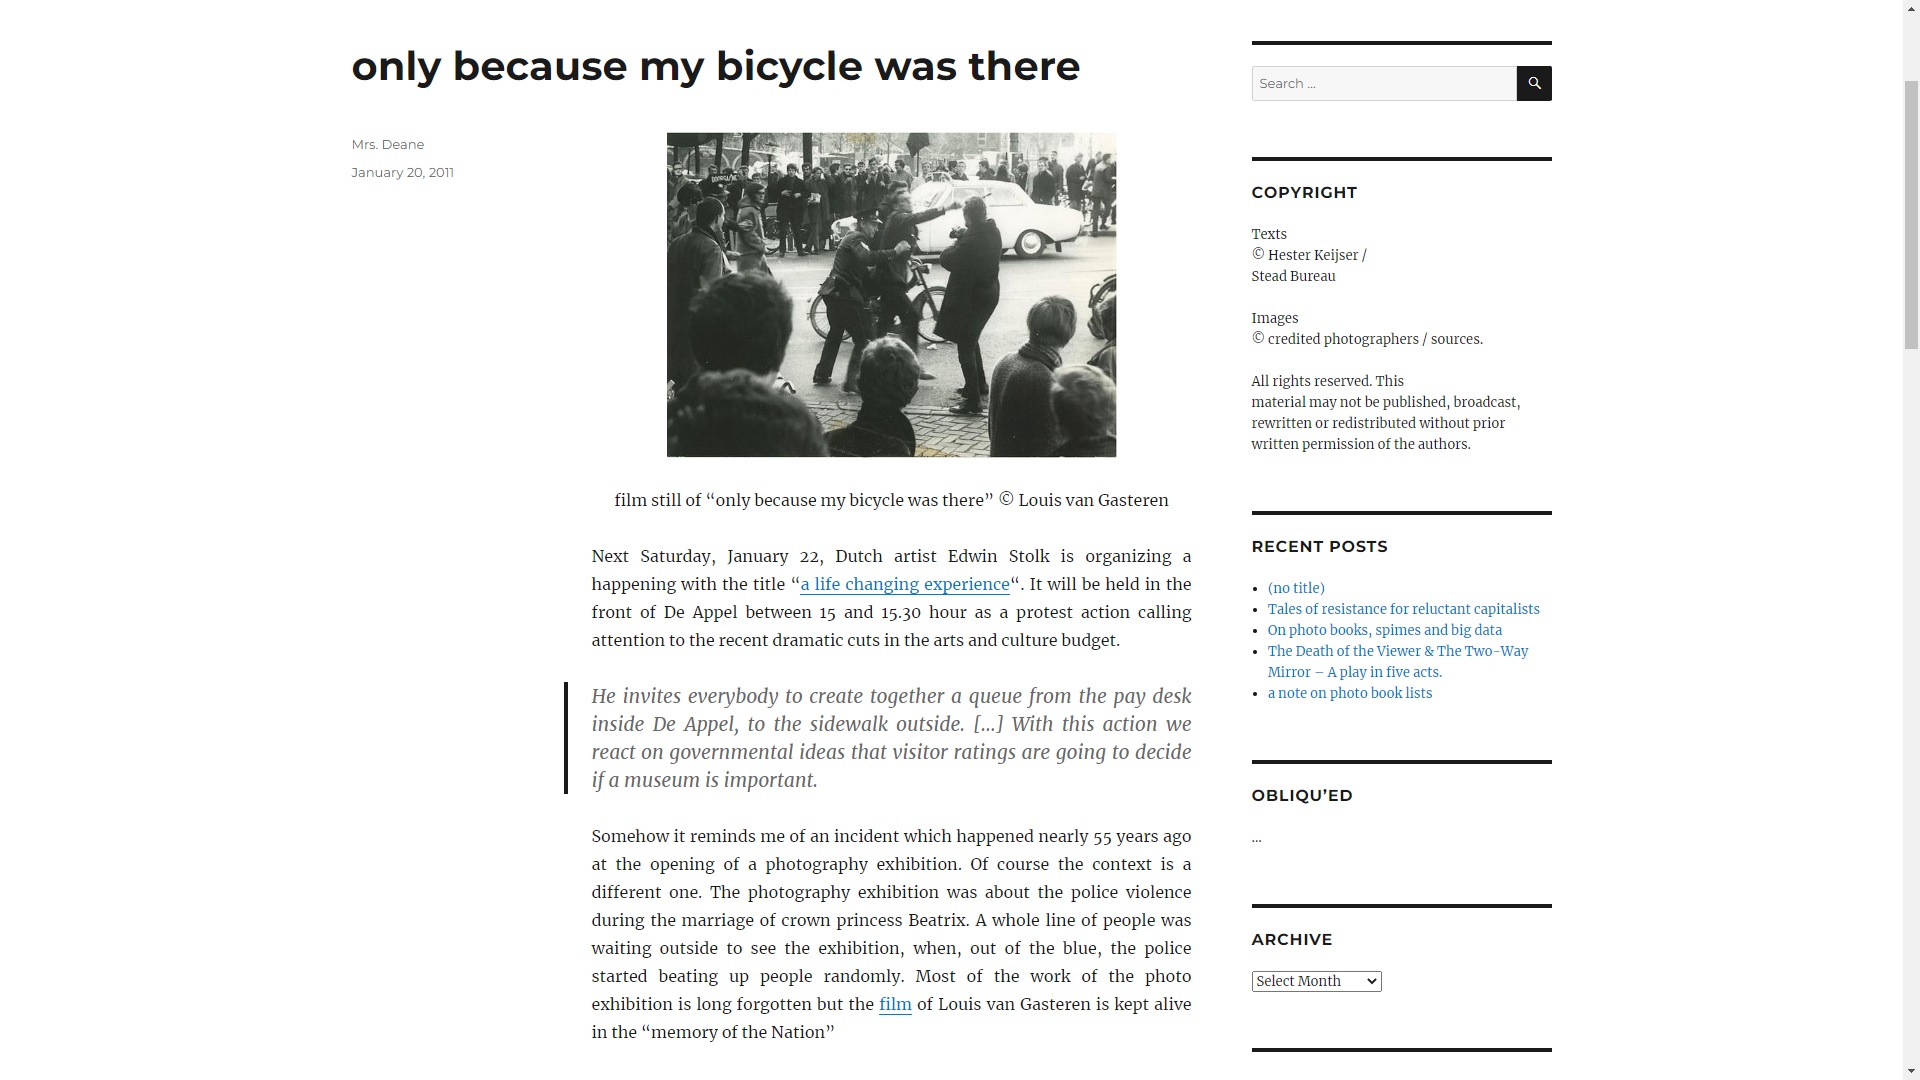 nly because my bicycle was there – written by Hester Keijser